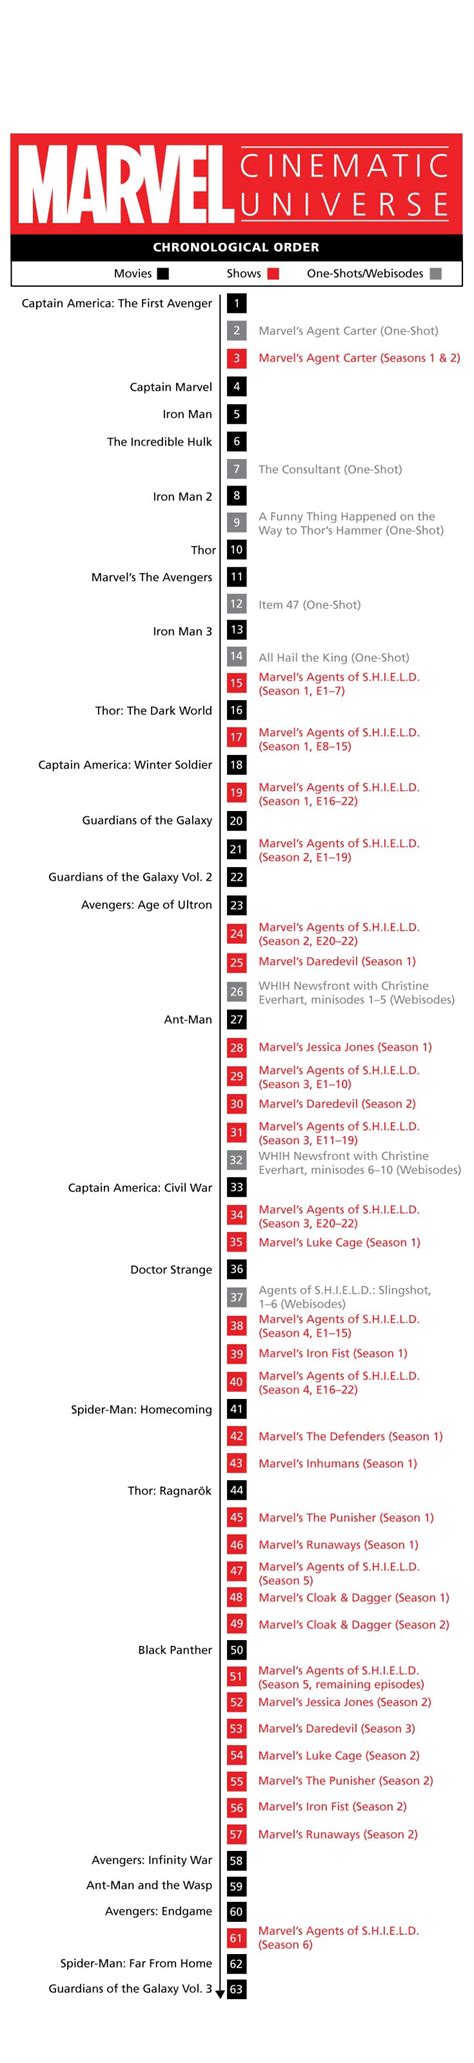 The date on each film below indicates the year or years it takes place, maybe specifics if they're we also have links to find the movies. How to Watch Marvel Movies